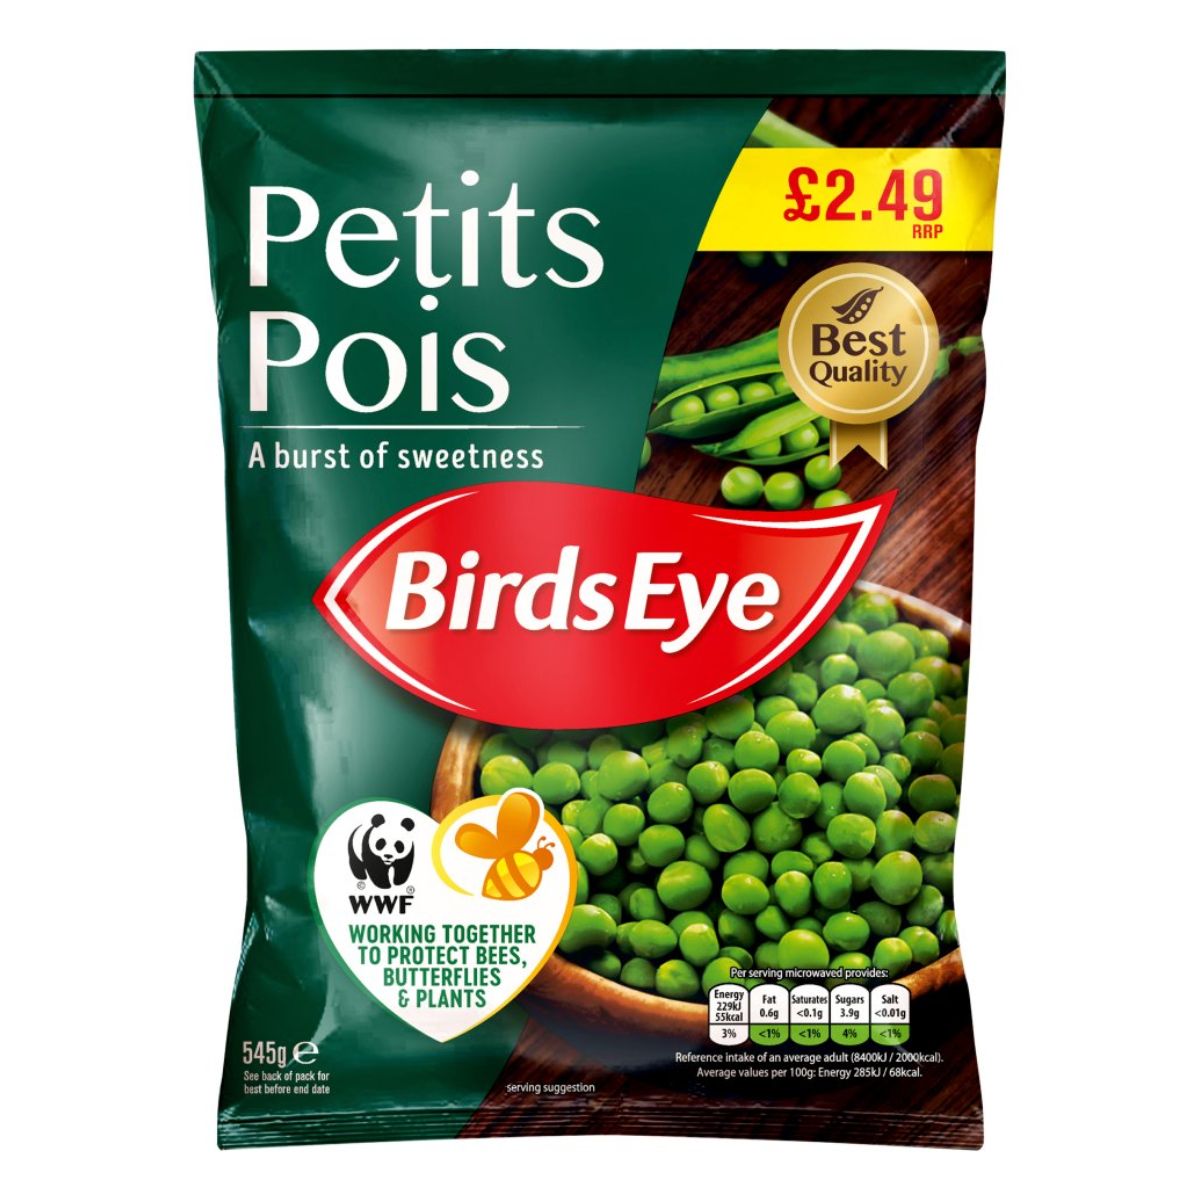 Petits Pois in a bag from Birds Eye - Petits Pois - 545g.